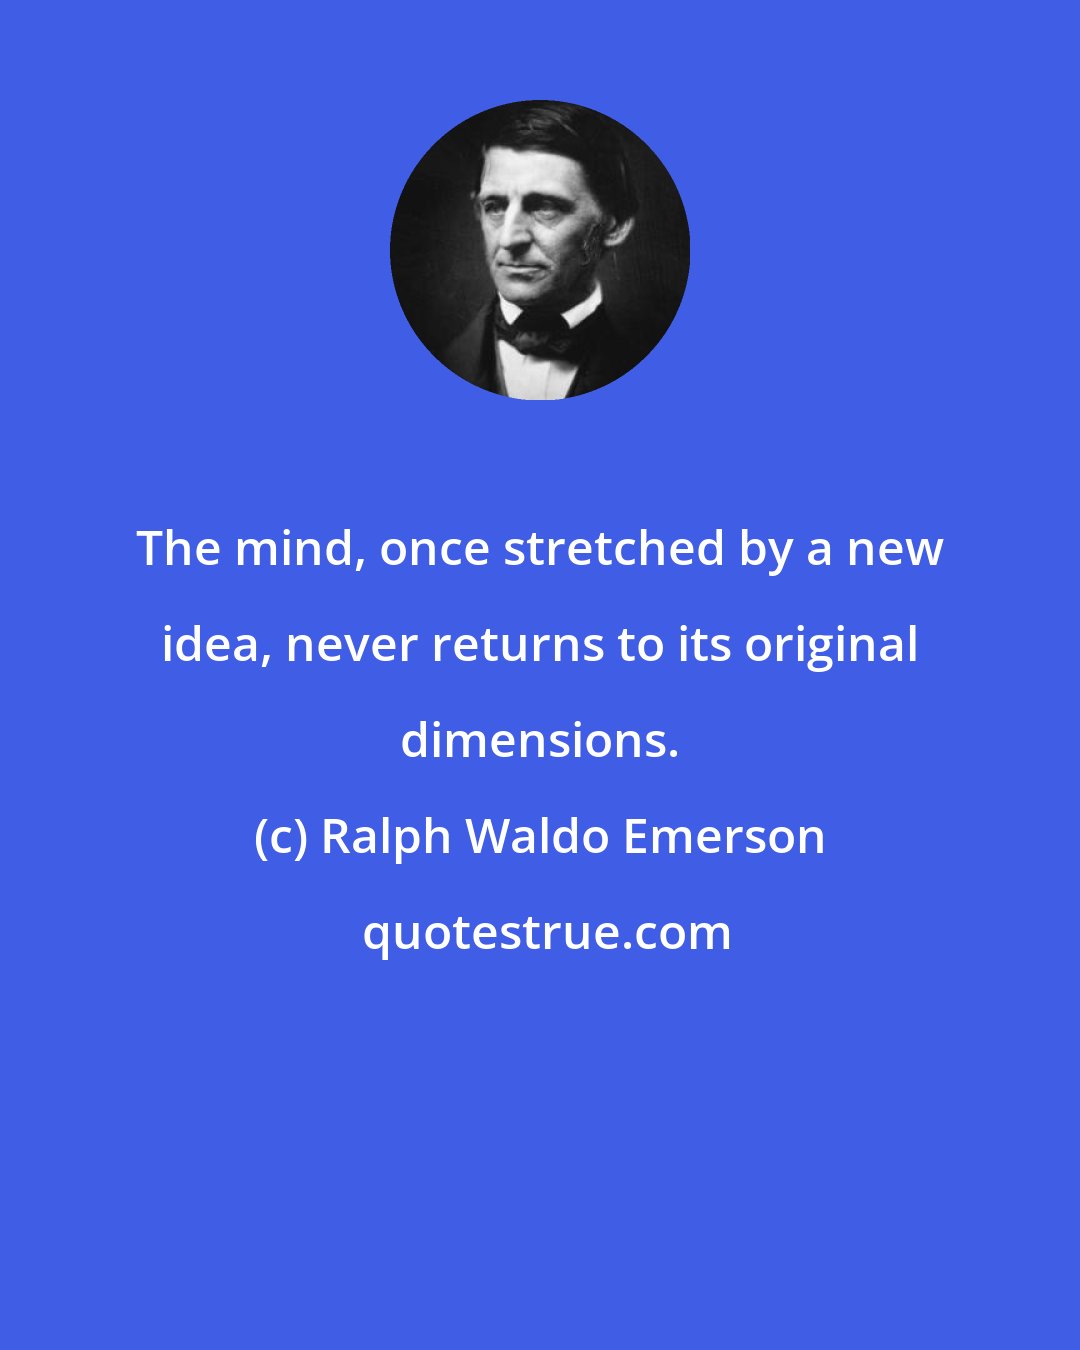 Ralph Waldo Emerson: The mind, once stretched by a new idea, never returns to its original dimensions.